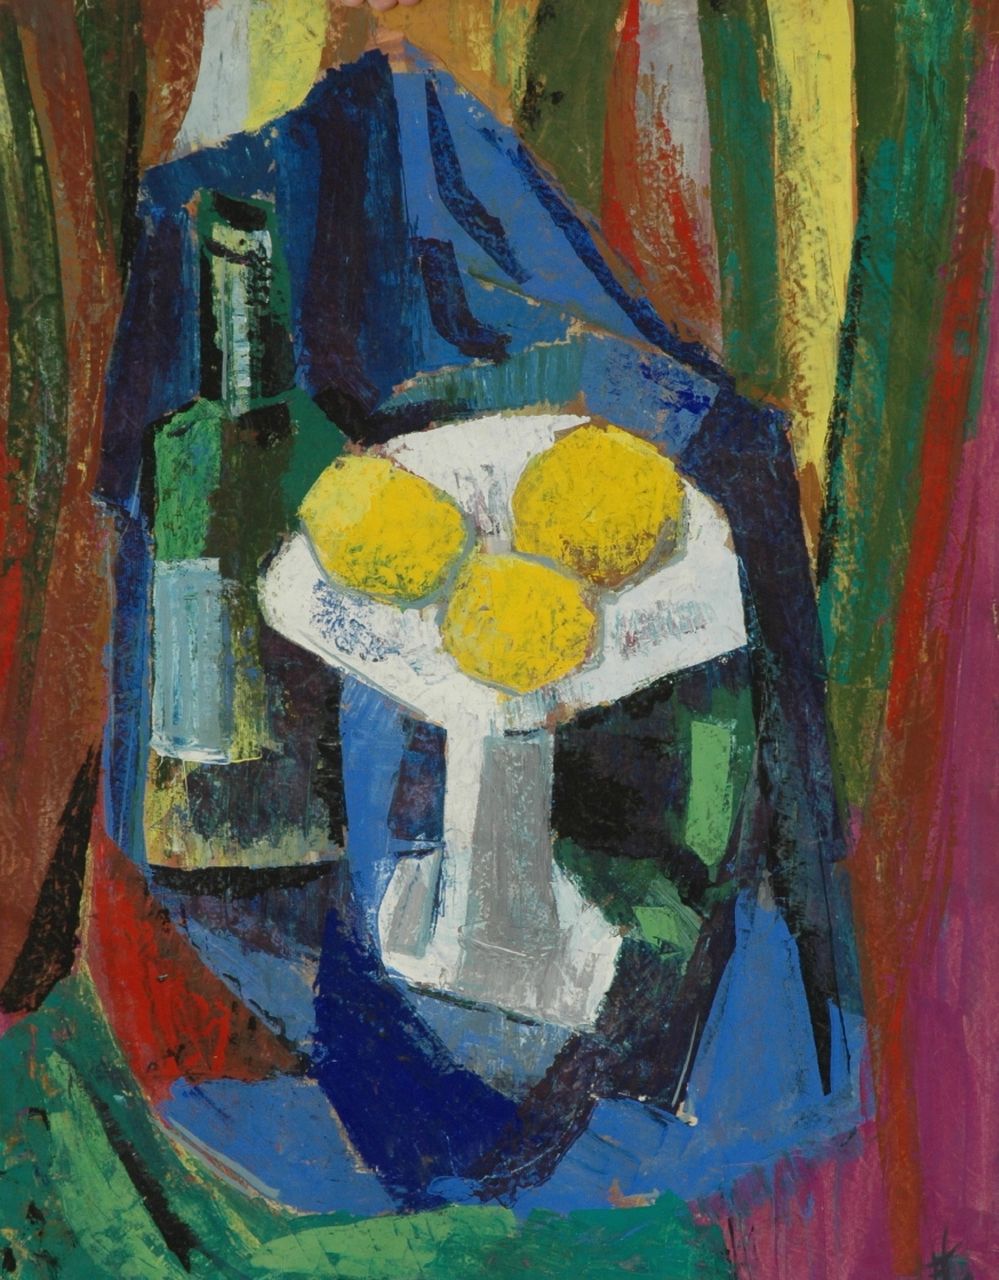 Haanstra jr. F.  | Folkert Haanstra jr., Still life, gouache on paper 64.6 x 49.9 cm, signed l.r. with monogram and dated 1963 on the reverse